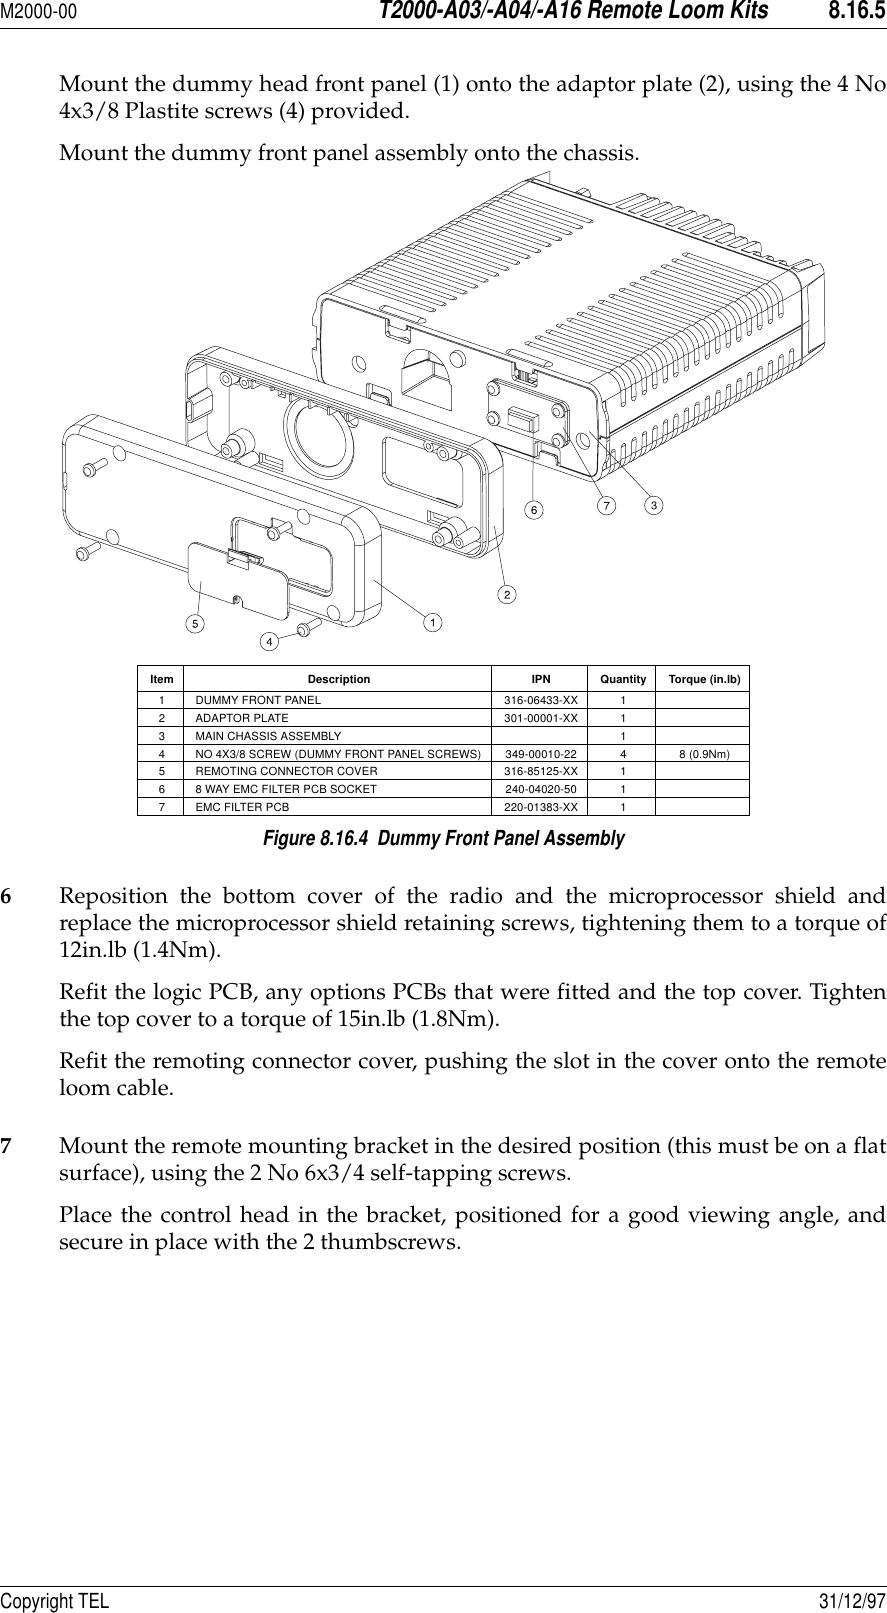 M2000-00T2000-A03/-A04/-A16 Remote Loom Kits8.16.5Copyright TEL 31/12/97Mount the dummy head front panel (1) onto the adaptor plate (2), using the 4 No4x3/8 Plastite screws (4) provided.Mount the dummy front panel assembly onto the chassis.Figure 8.16.4  Dummy Front Panel Assembly6Reposition the bottom cover of the radio and the microprocessor shield andreplace the microprocessor shield retaining screws, tightening them to a torque of12in.lb (1.4Nm).Refit the logic PCB, any options PCBs that were fitted and the top cover. Tightenthe top cover to a torque of 15in.lb (1.8Nm).Refit the remoting connector cover, pushing the slot in the cover onto the remoteloom cable.7Mount the remote mounting bracket in the desired position (this must be on a flatsurface), using the 2 No 6x3/4 self-tapping screws.Place the control head in the bracket, positioned for a good viewing angle, andsecure in place with the 2 thumbscrews.Item Description IPN Quantity Torque (in.lb)1 DUMMY FRONT PANEL 316-06433-XX 12 ADAPTOR PLATE 301-00001-XX 13 MAIN CHASSIS ASSEMBLY 14 NO 4X3/8 SCREW (DUMMY FRONT PANEL SCREWS) 349-00010-22 4 8 (0.9Nm)5 REMOTING CONNECTOR COVER 316-85125-XX 16 8 WAY EMC FILTER PCB SOCKET 240-04020-50 17 EMC FILTER PCB 220-01383-XX 1